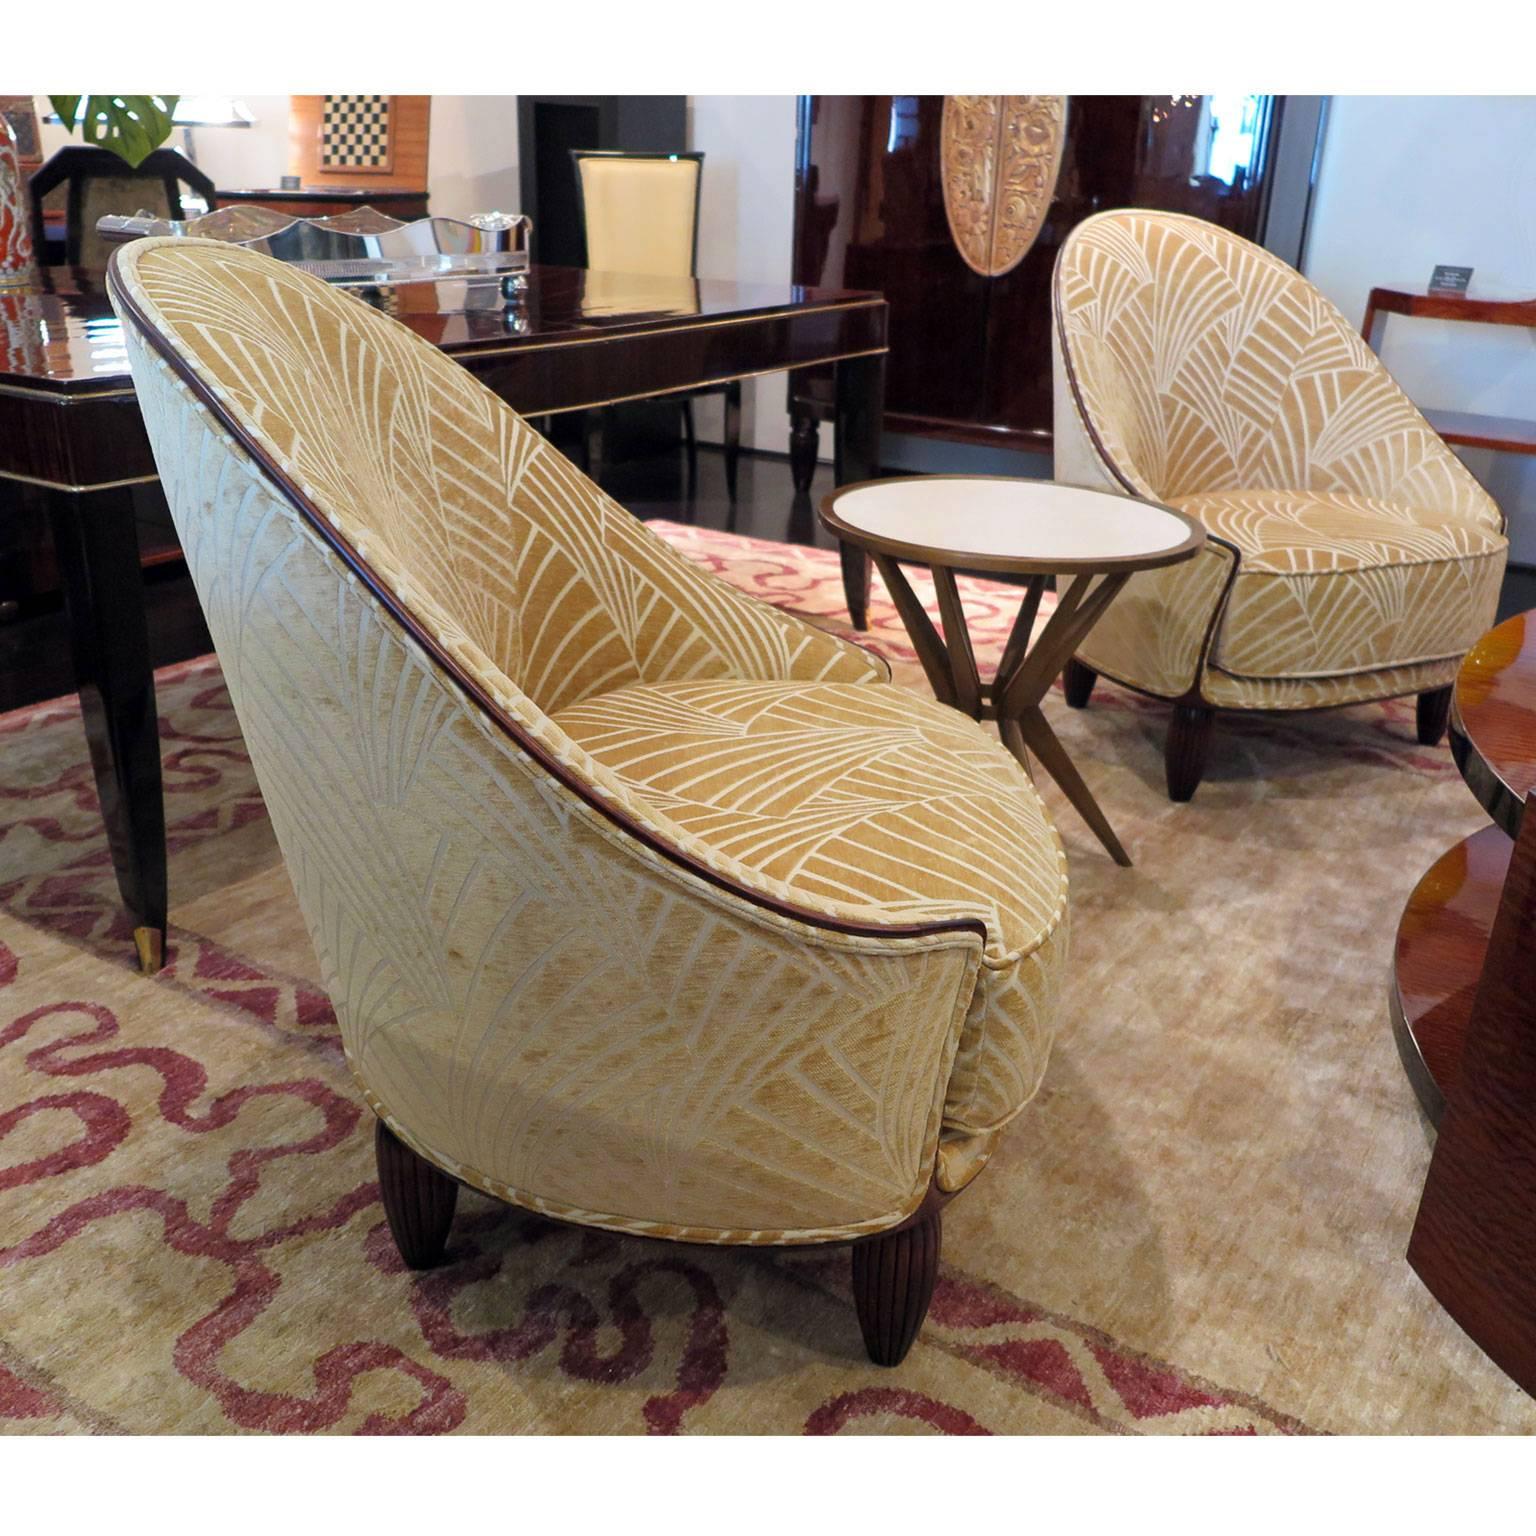 Pair of tall arched-back slipper chairs from France, circa 1930s. A thin Mahogany frame with a matte or satin finish and exposed tapered and ribbed mahogany legs. Upholstered in pale gold fan-pattern cut velvet with contrast piping.

     